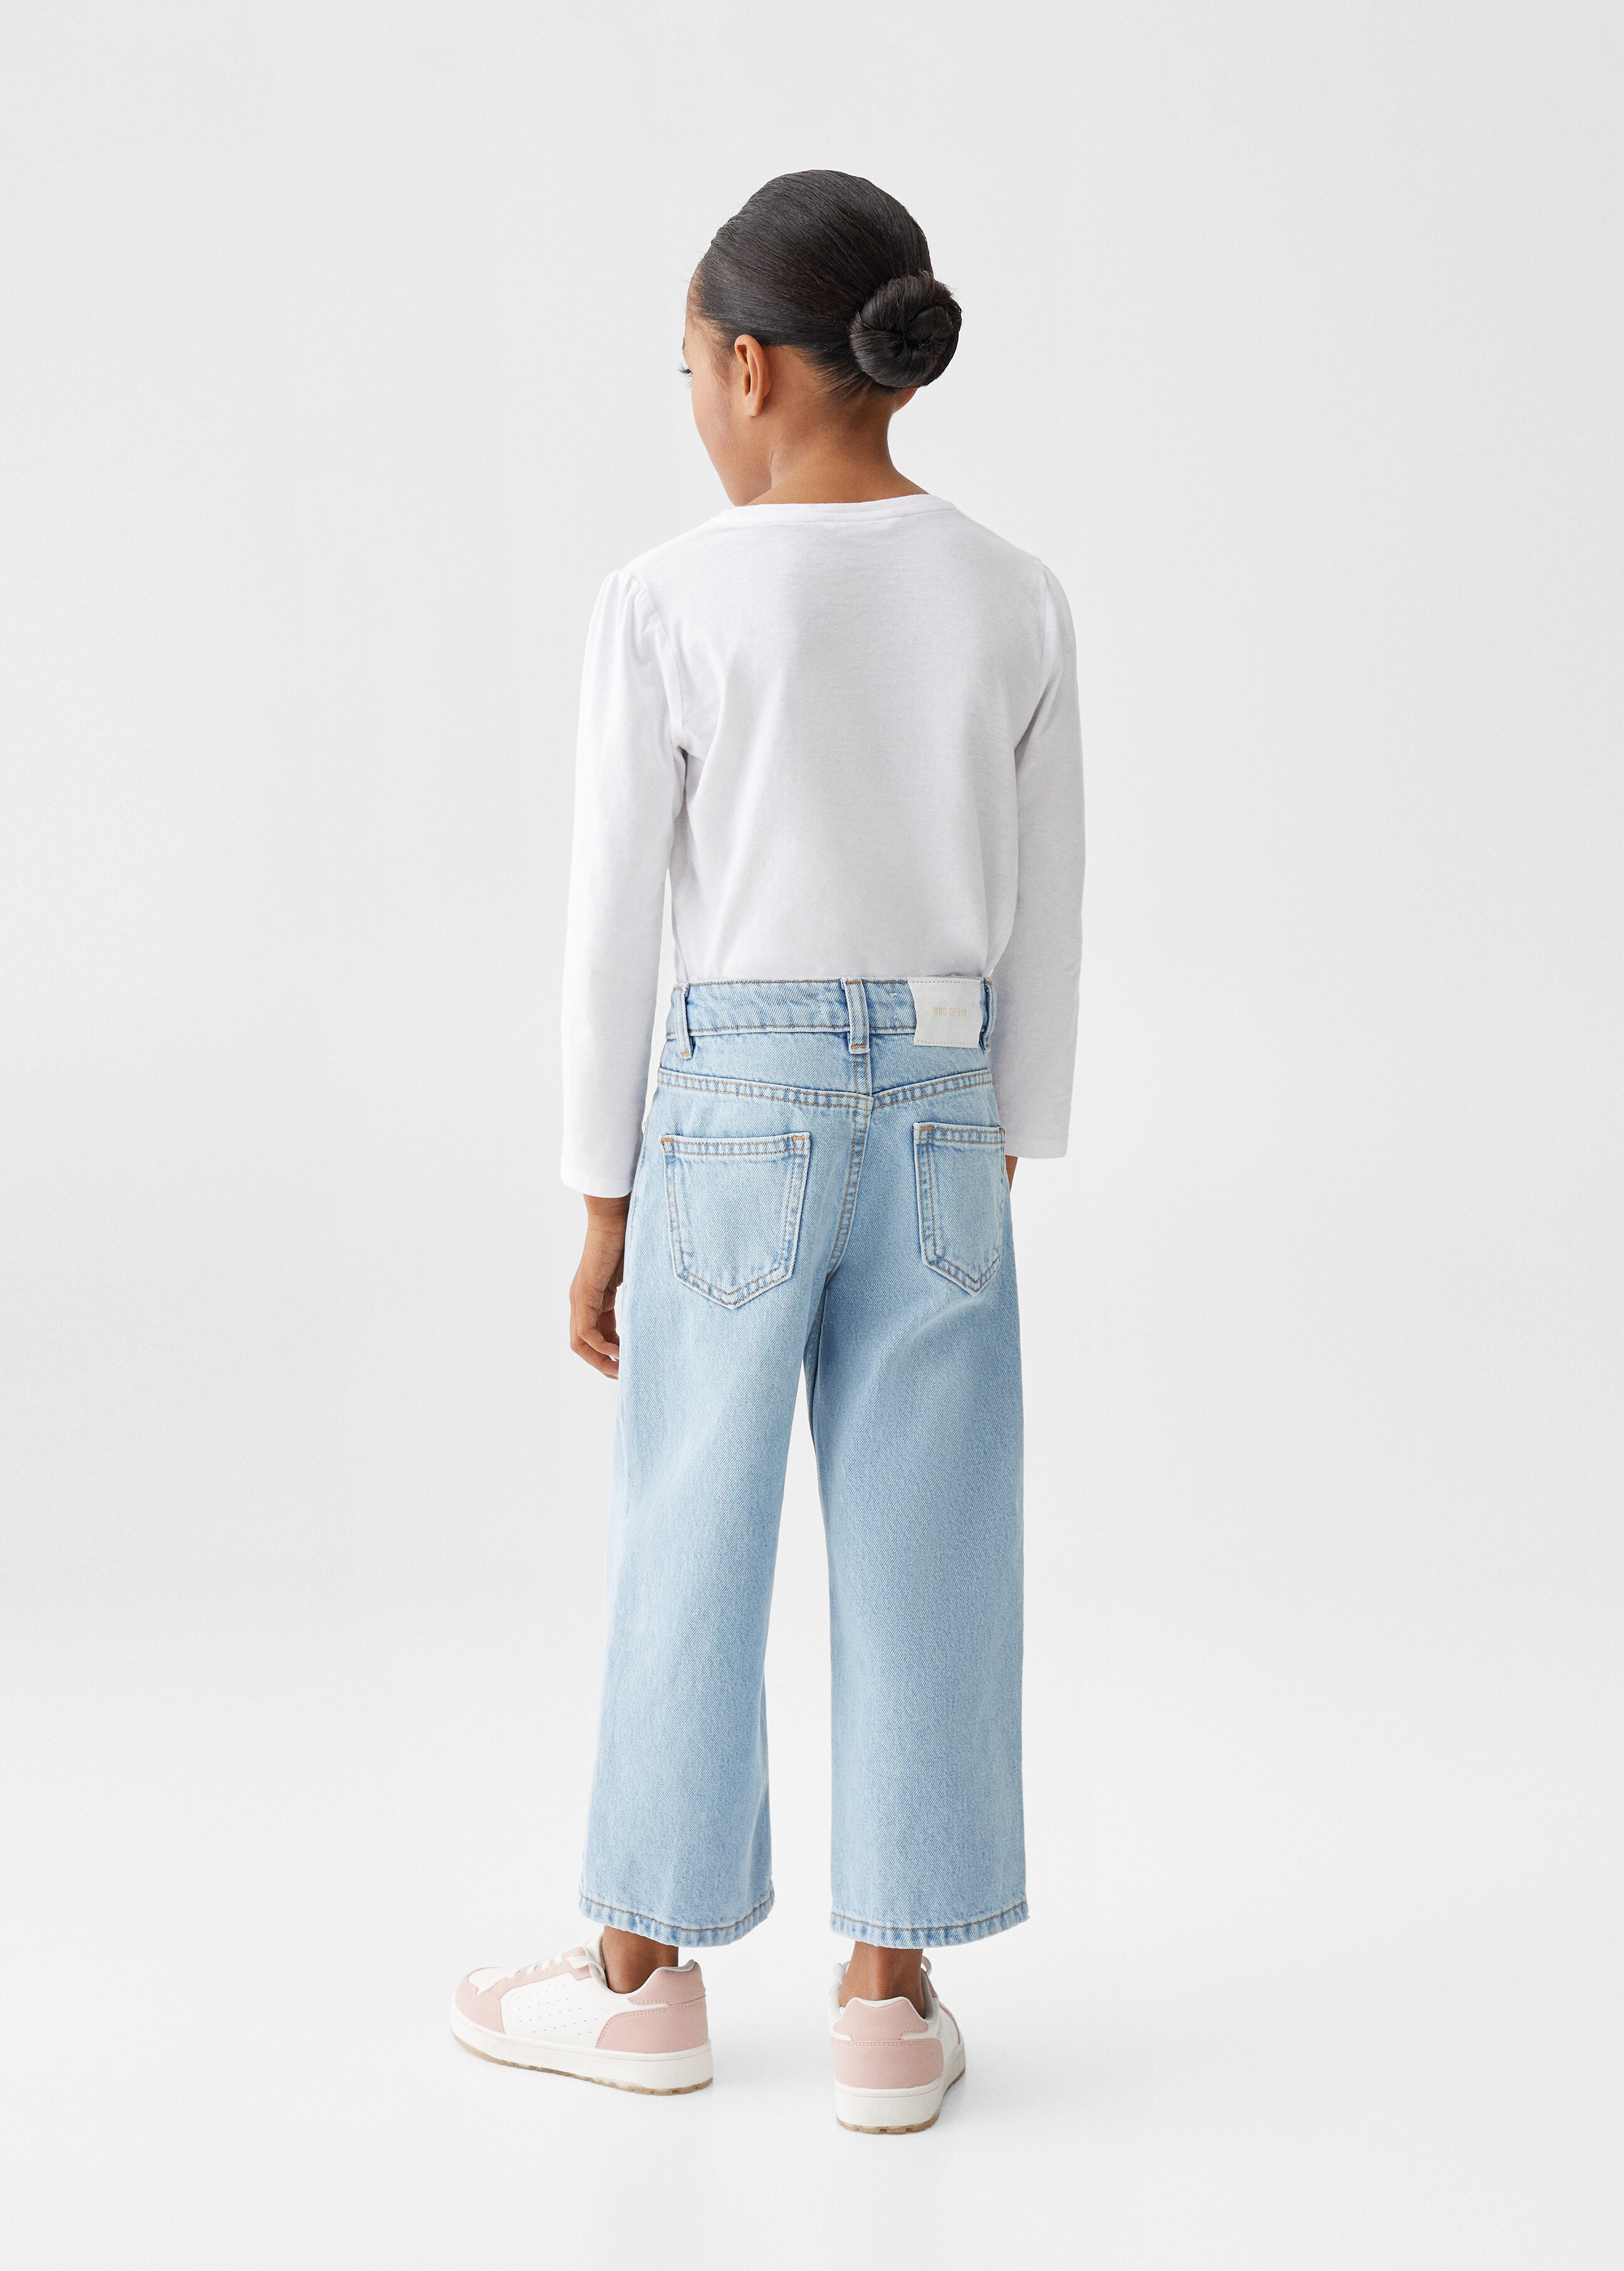 Culotte jeans - Reverse of the article